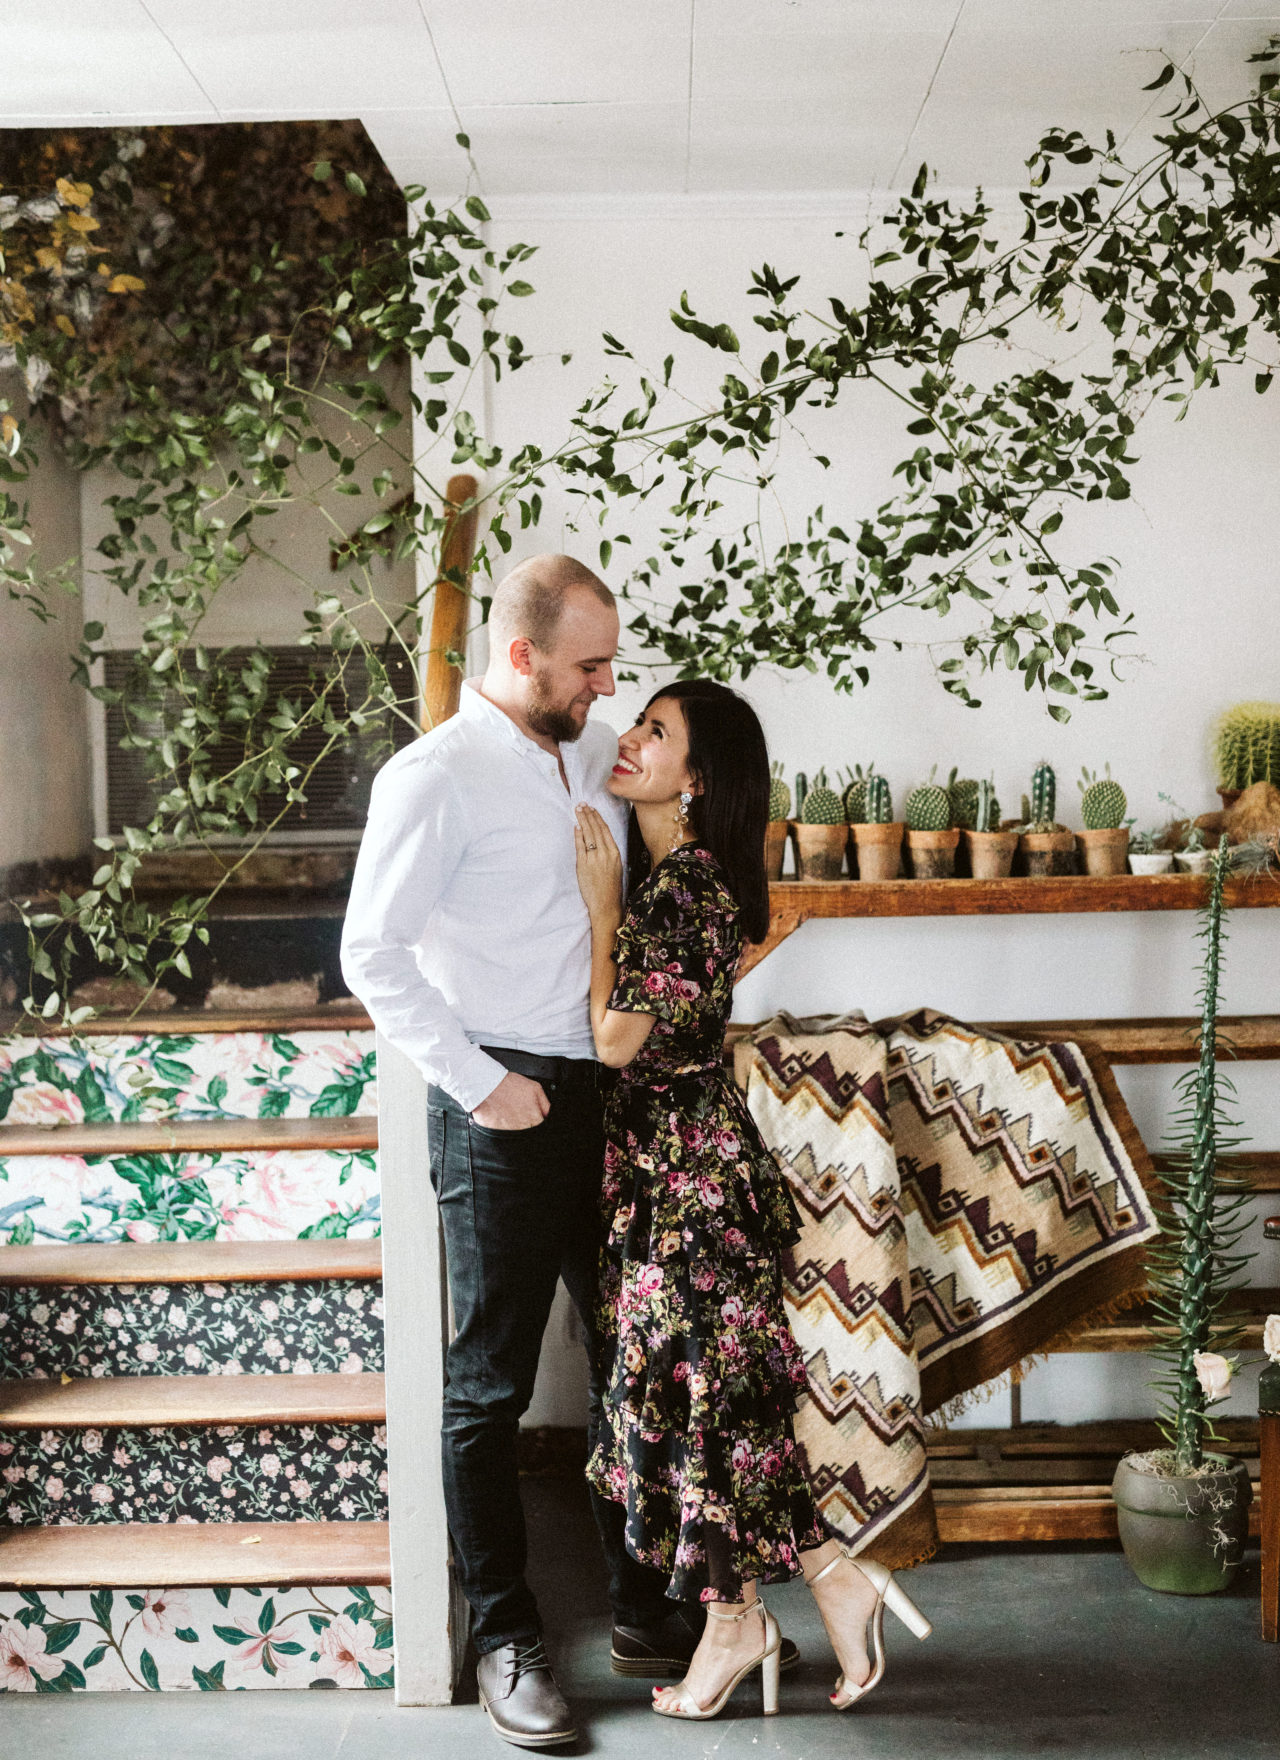 West Texas Engagement Shoot + Giveaway!